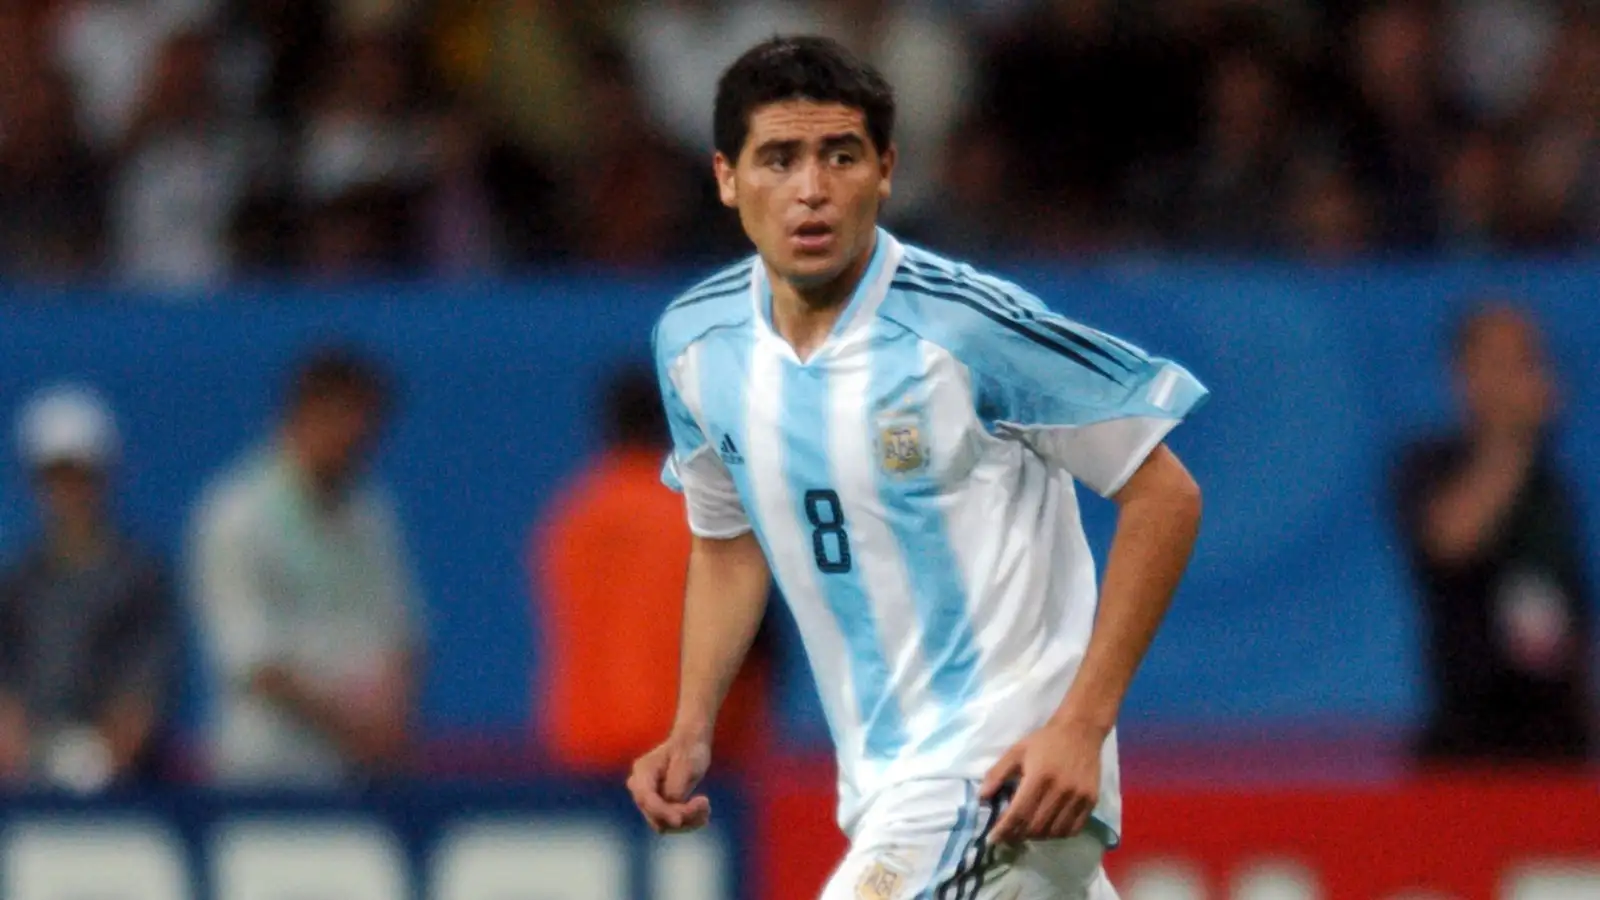 Juan Roman Riquelme once broke the space-time continuum with an obscene pass